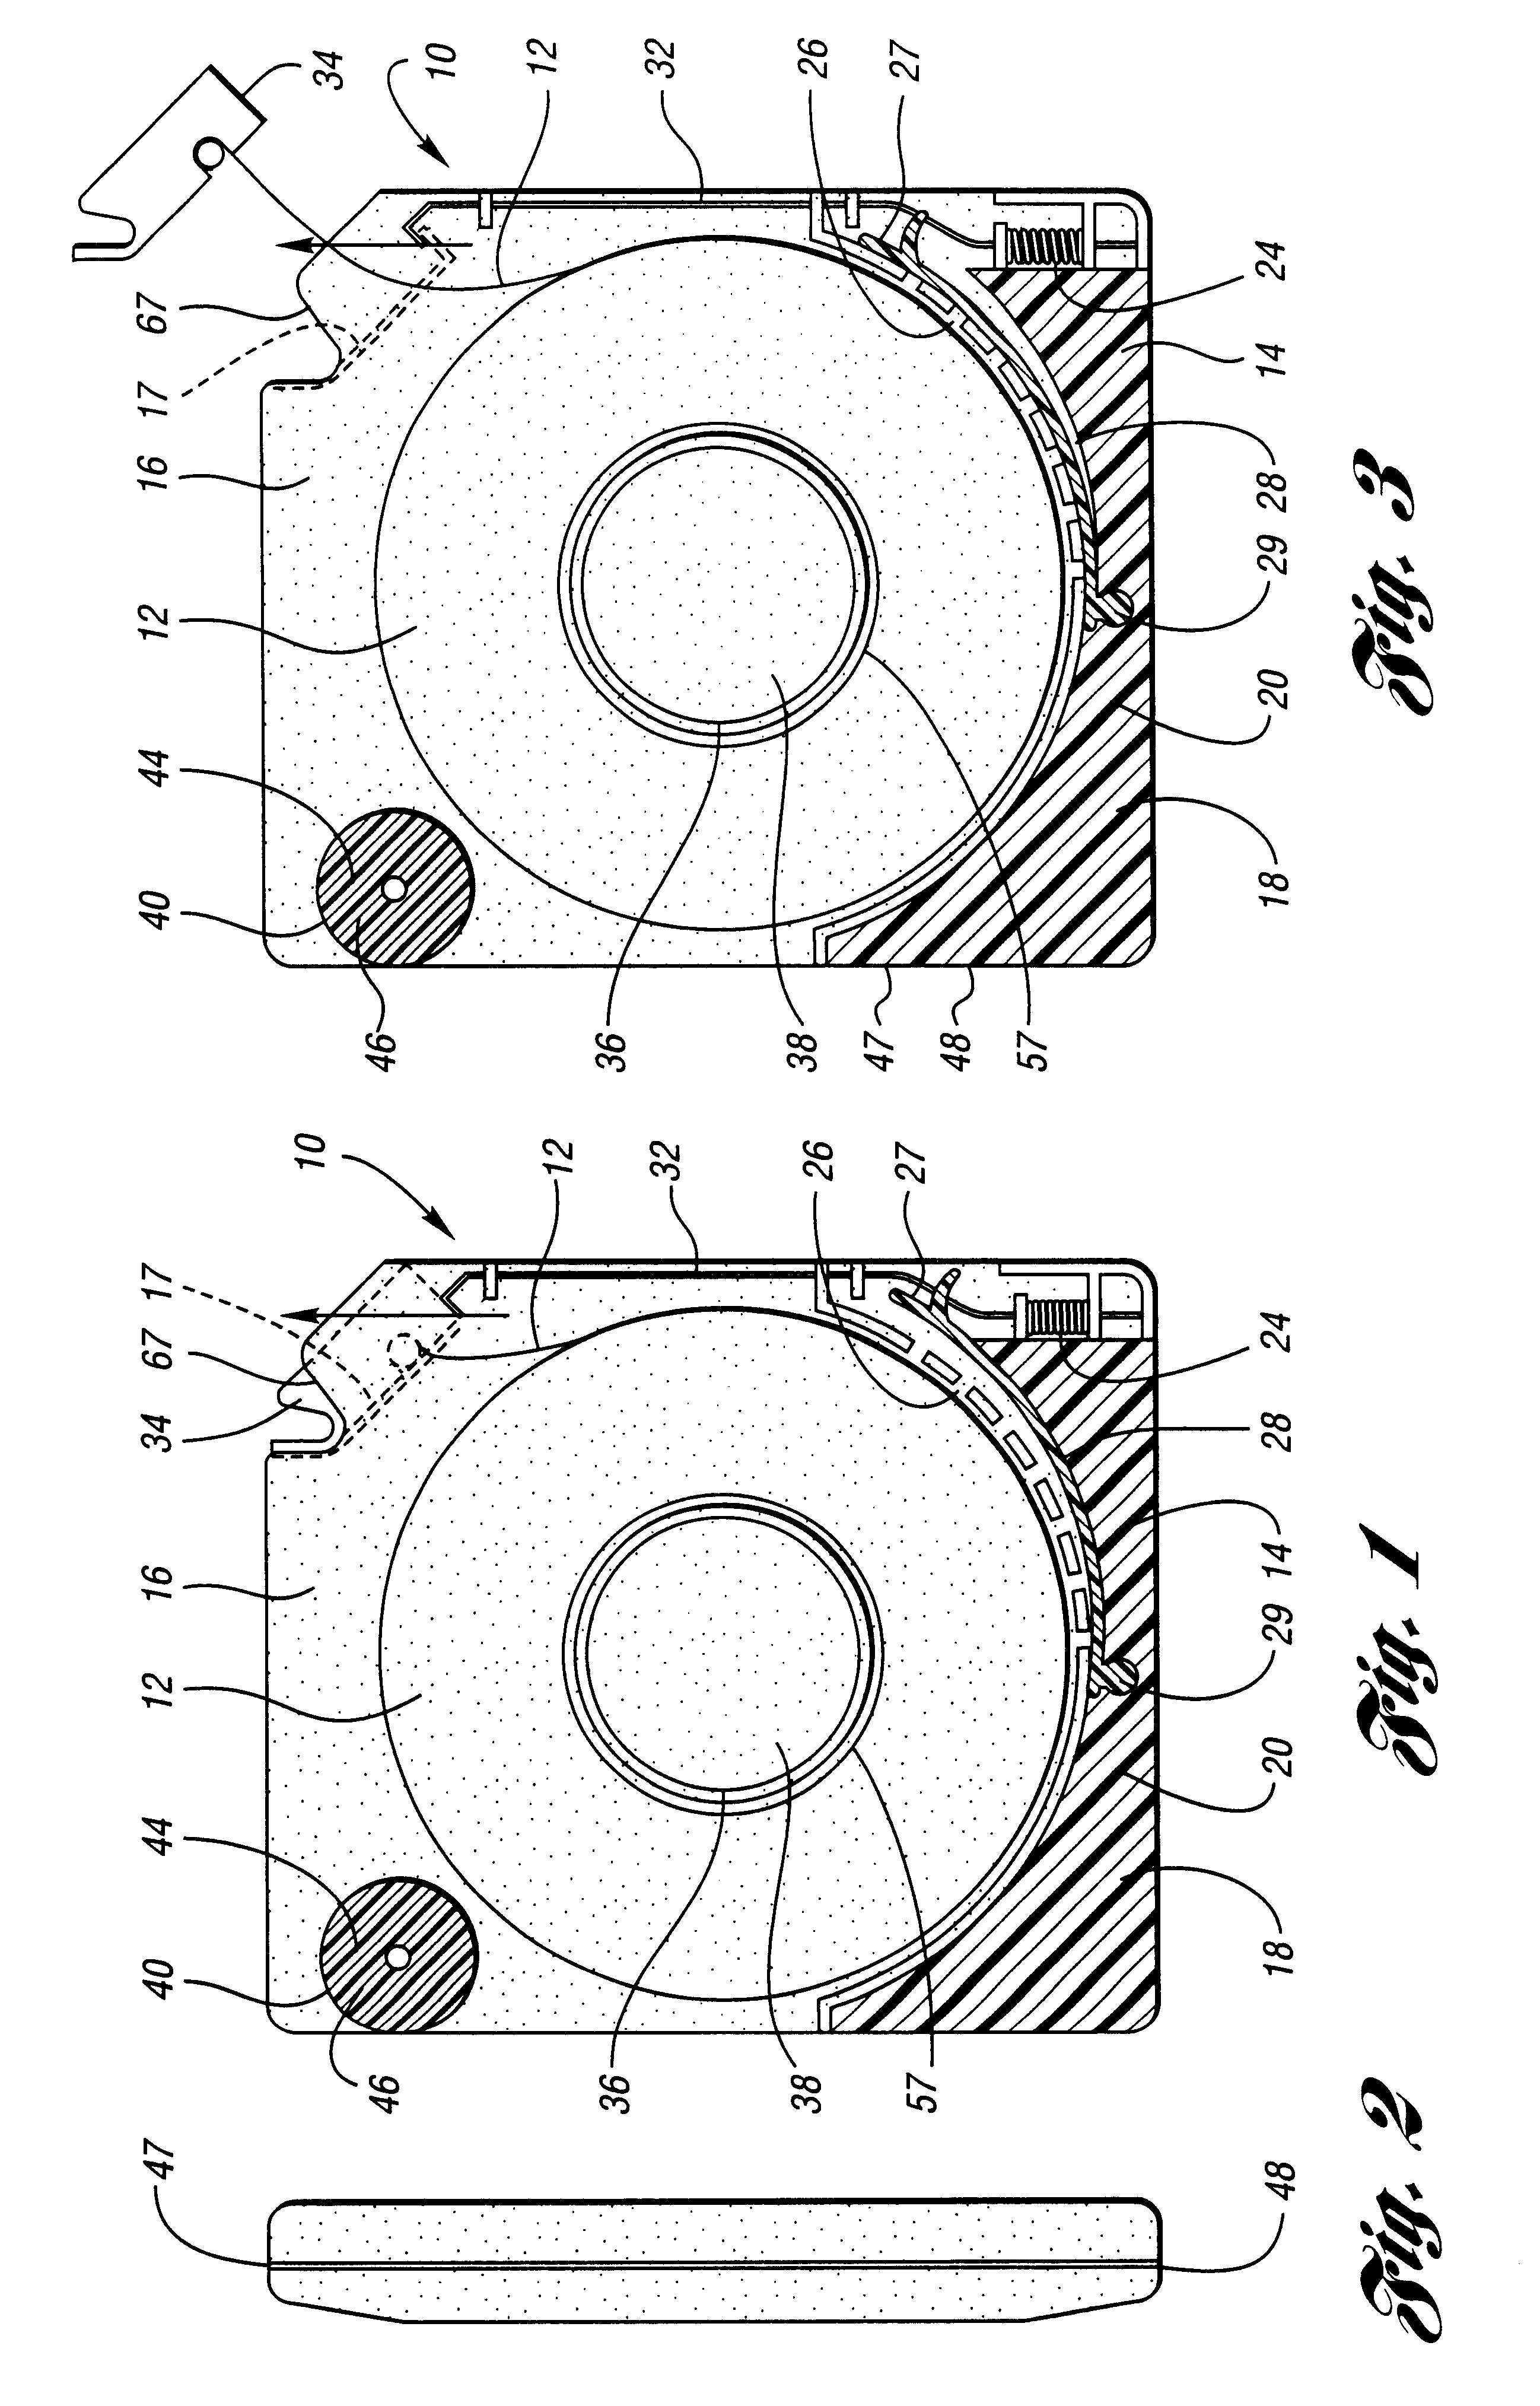 Method of controlling the internal environment of a data storage cartridge